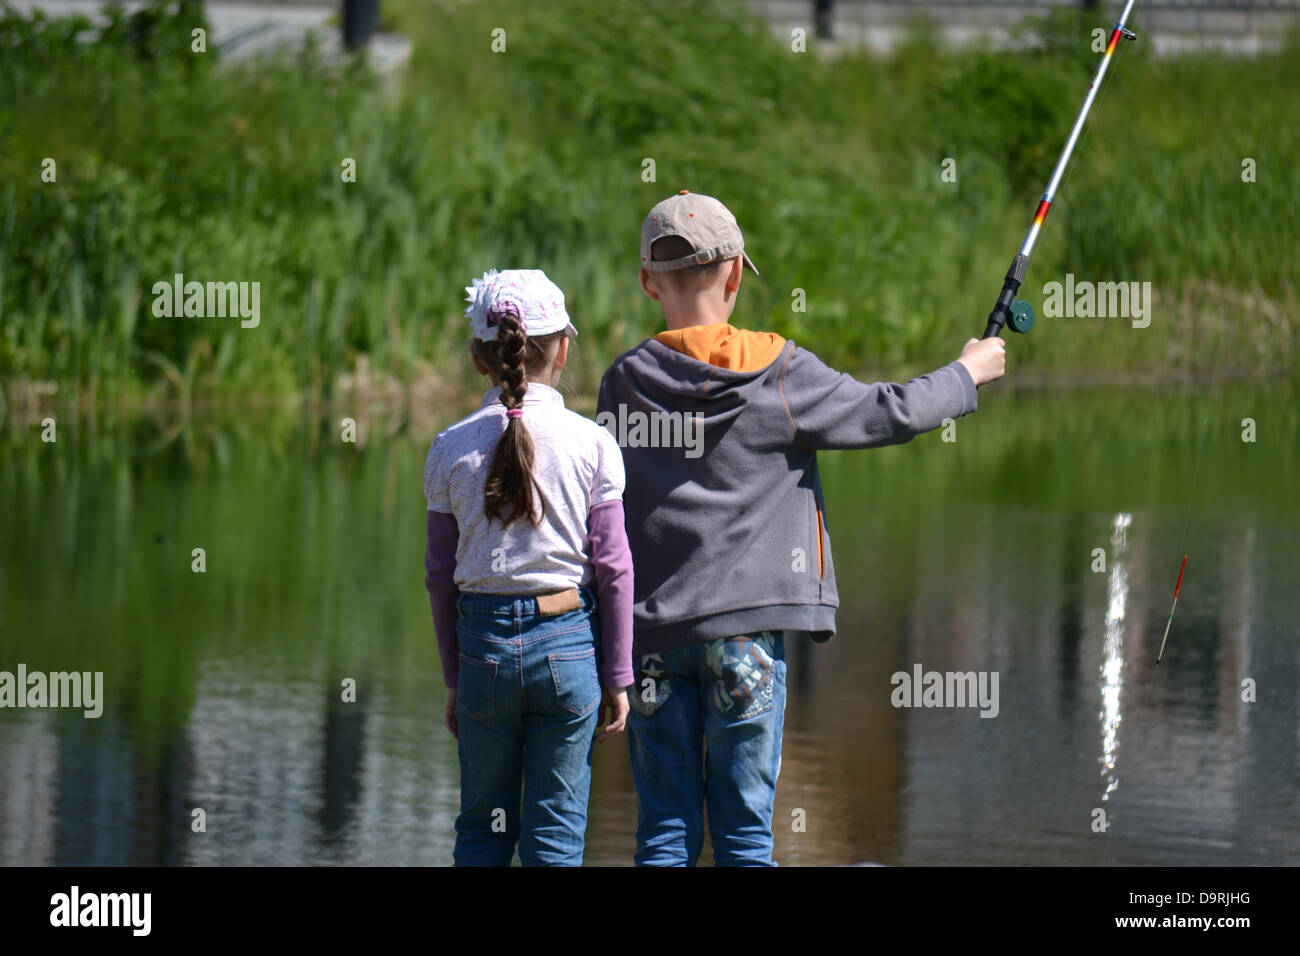 https://c8.alamy.com/comp/D9RJHG/the-girl-and-the-boy-with-a-rod-stand-on-the-bank-of-a-pond-D9RJHG.jpg